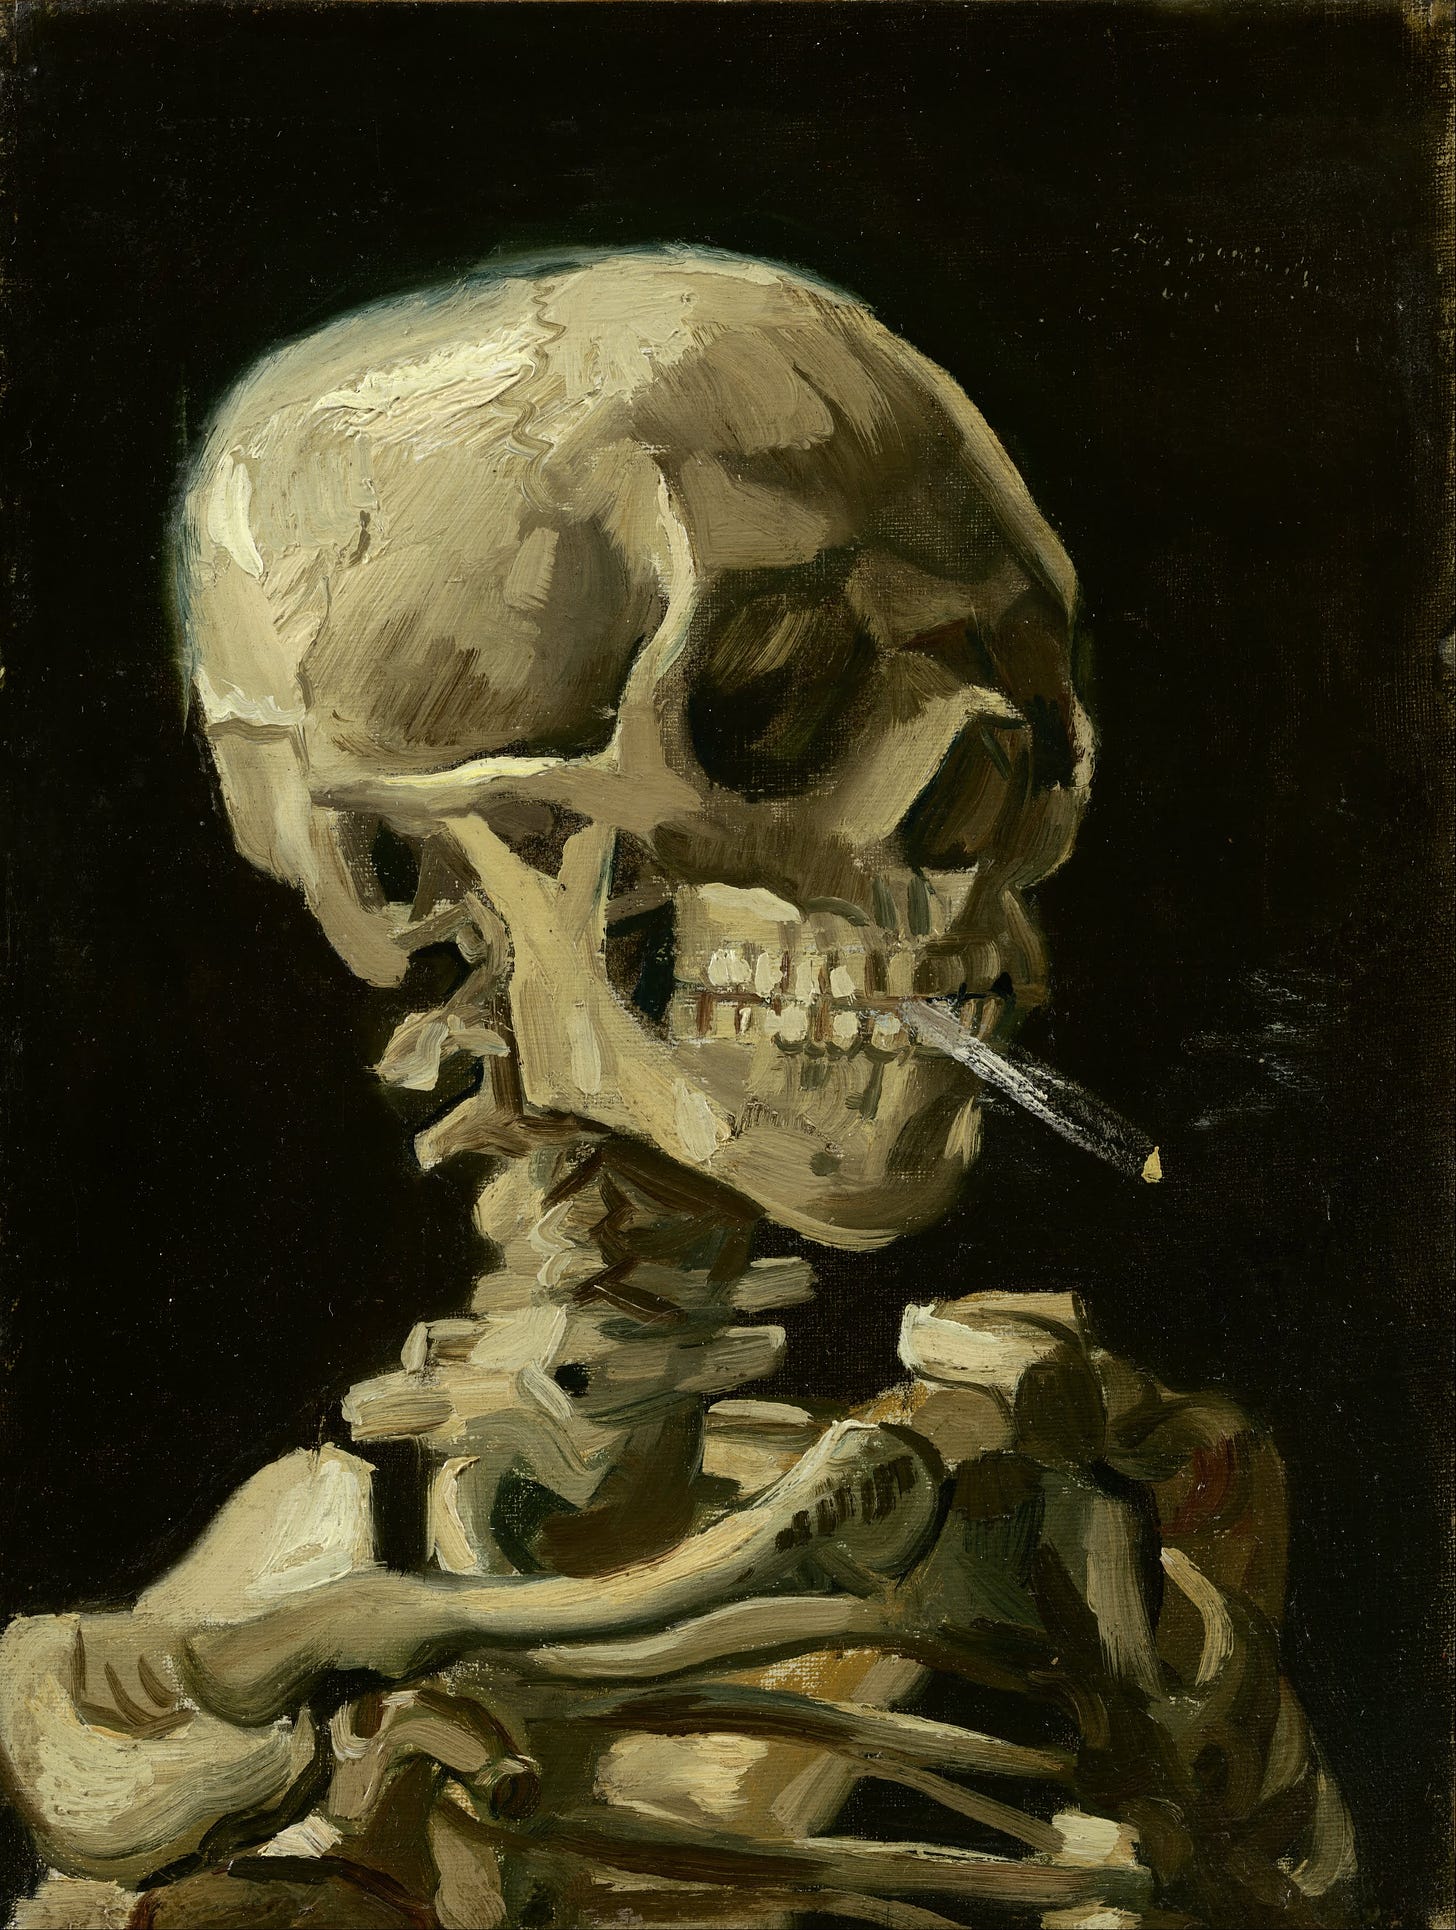 Skull of a Skeleton with Burning Cigarette - Wikipedia